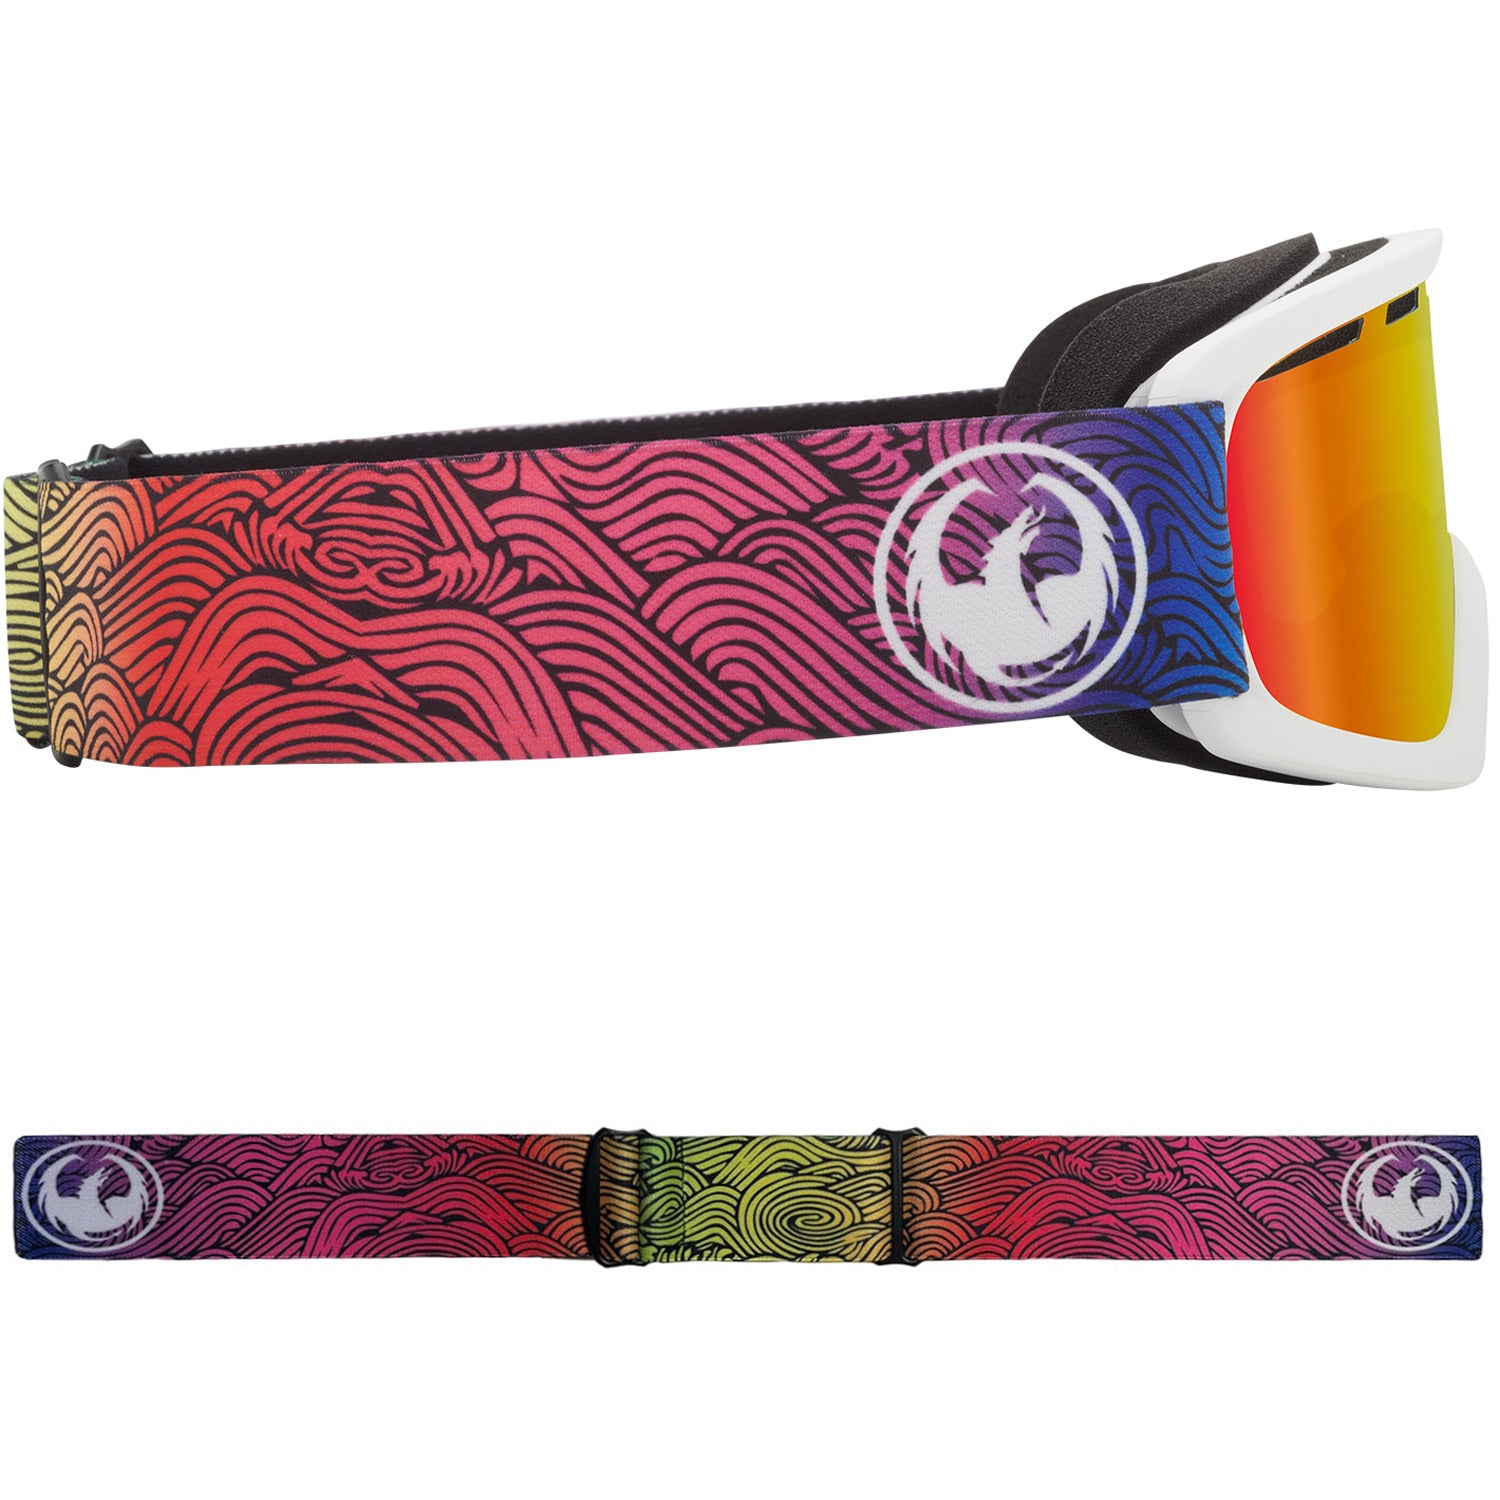 Dragon LIL D Snow Goggles 2023 Curly Lumalens Red Ion Lens